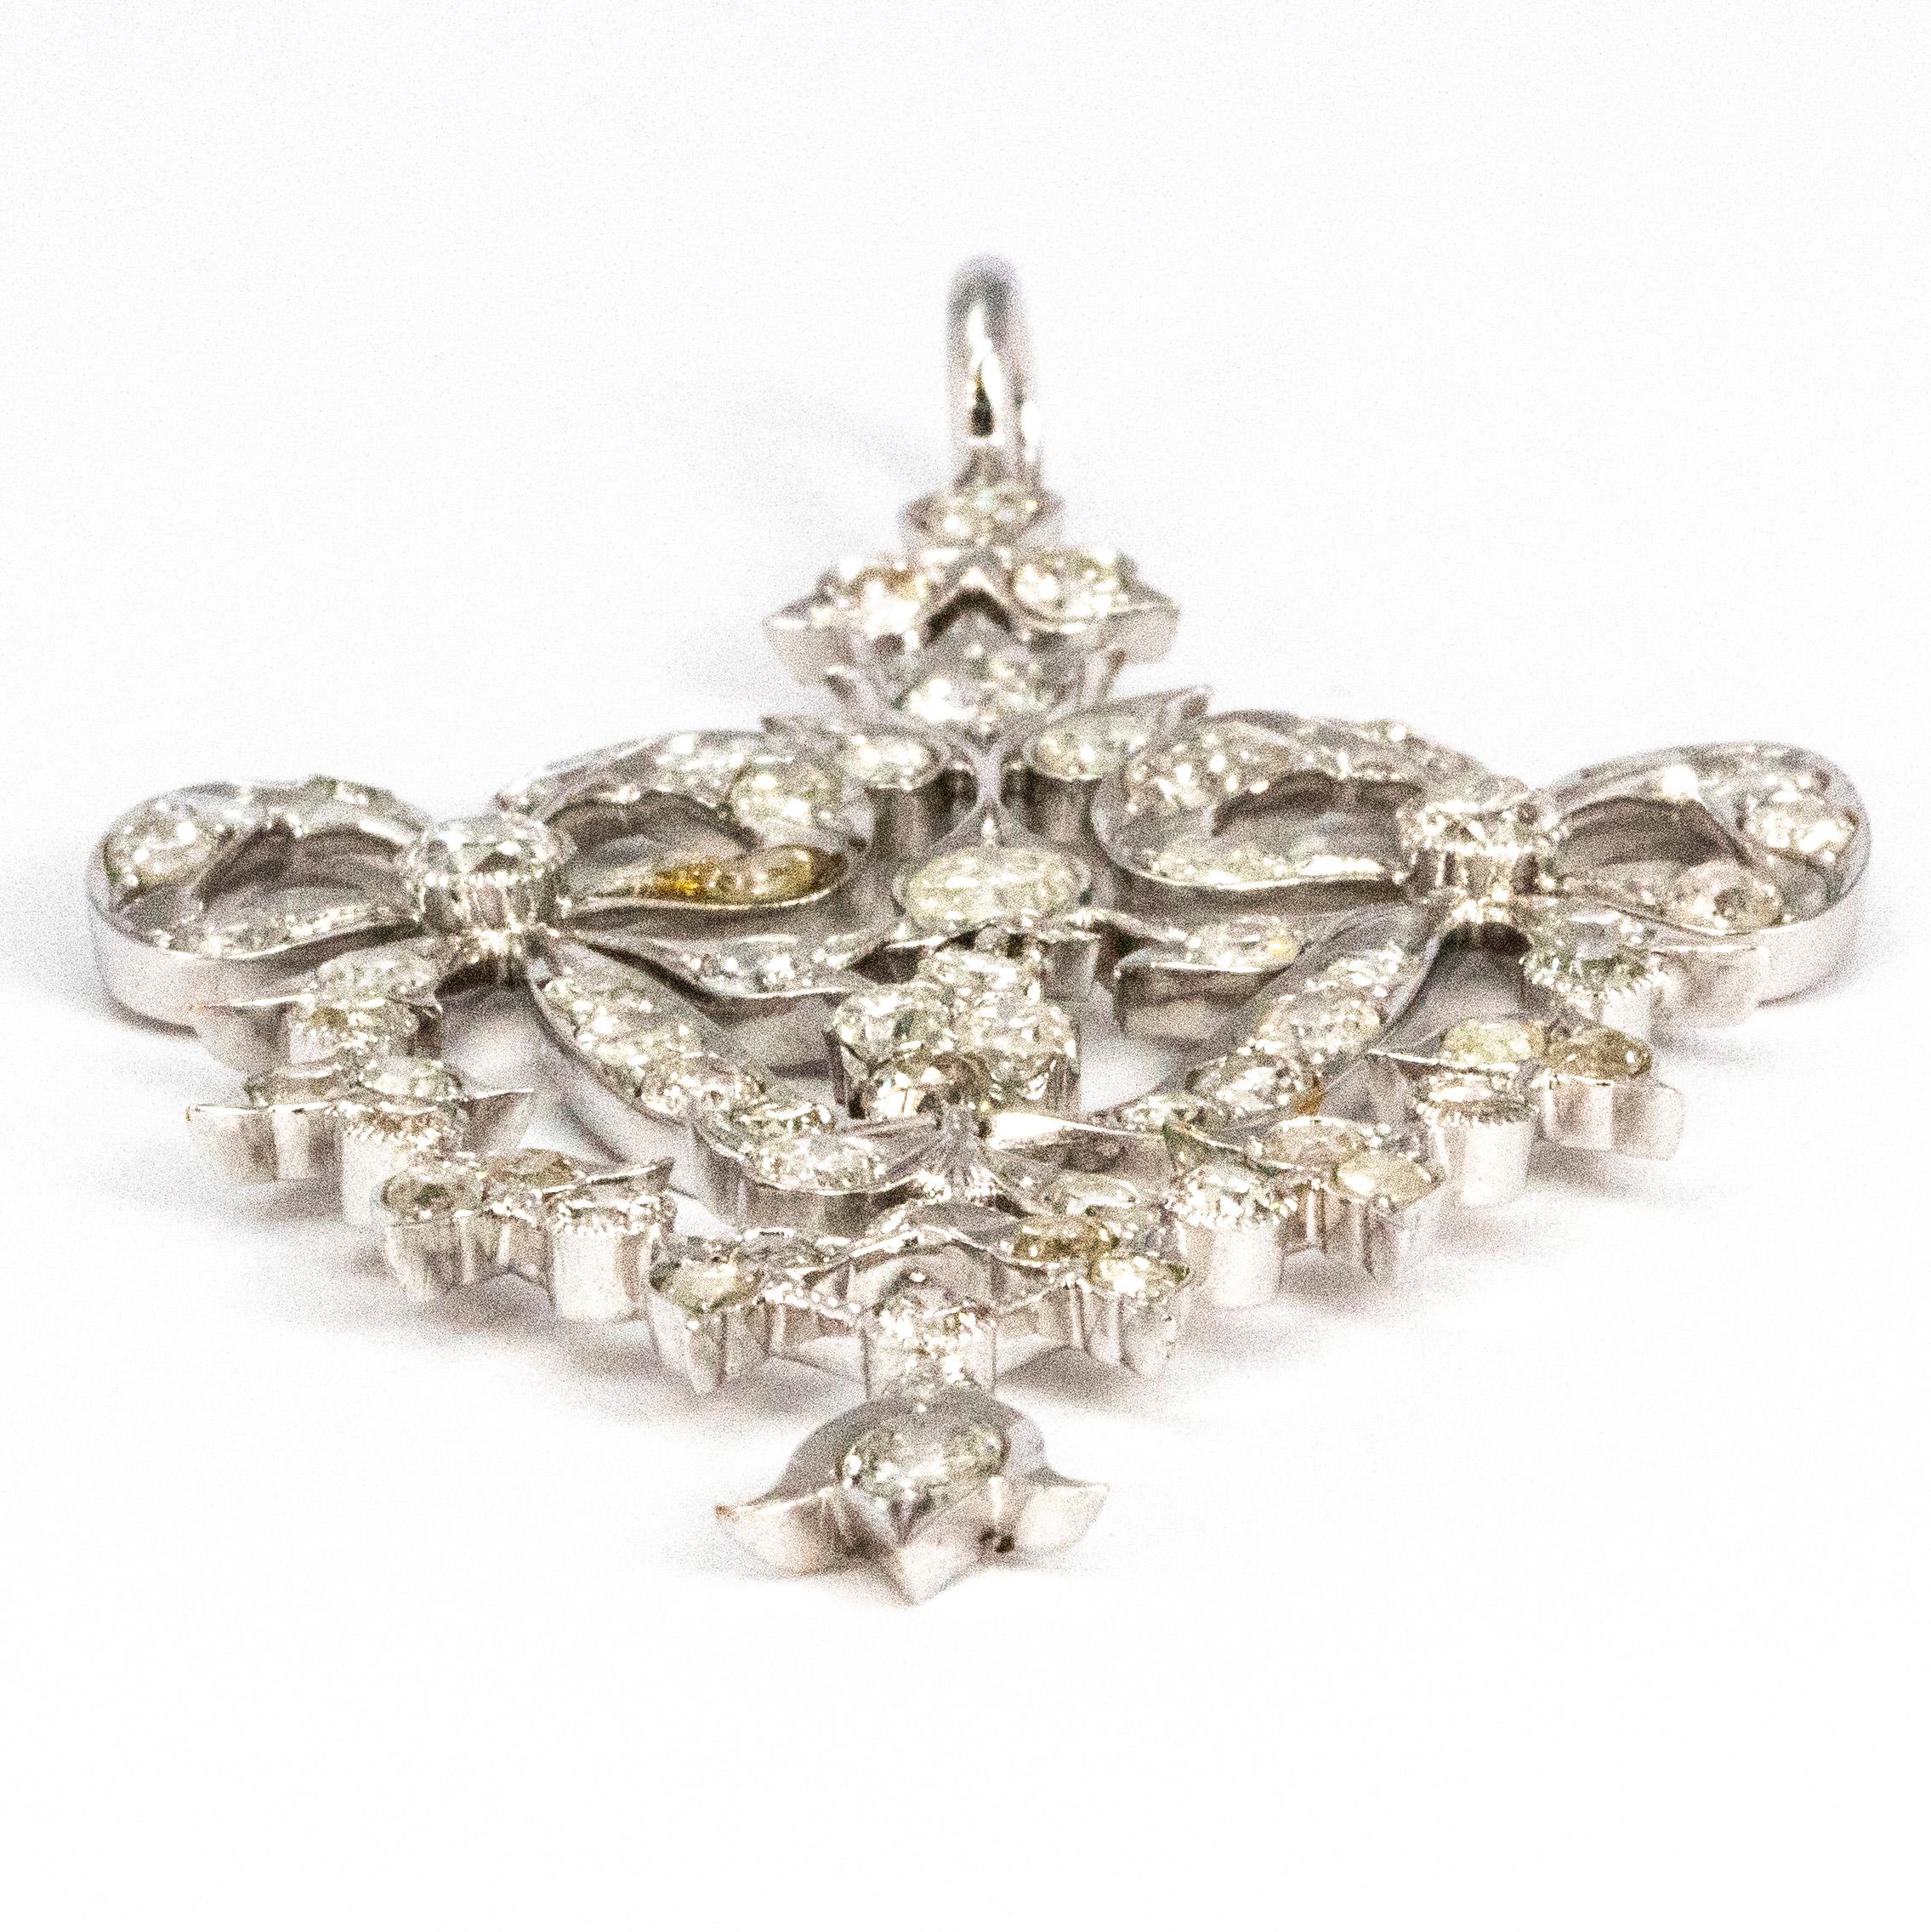 The shimmering diamonds glitter beautifully on this platinum pendant. The diamonds are old European cut. The design of this pendant features two bows with sweeping ribbons and has a few separate dangling stones throughout. 

Dimensions: 2 1/2 inch